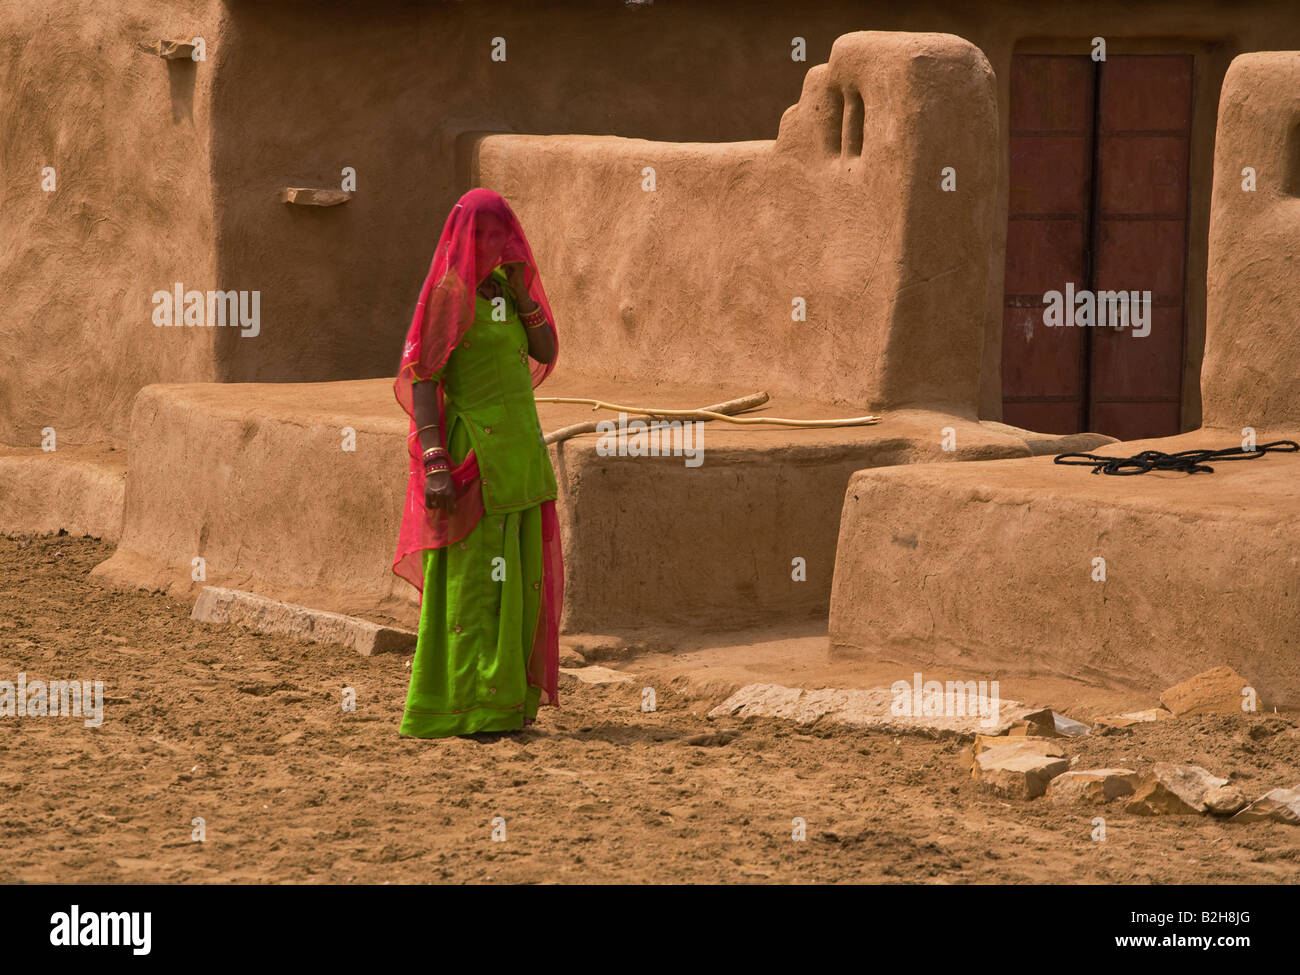 A BANJARI TRIBAL WOMAN and her classic MUD HOUSE in a village in the THAR DESERT near JAISALMER RAJASTHAN INDIA Stock Photo